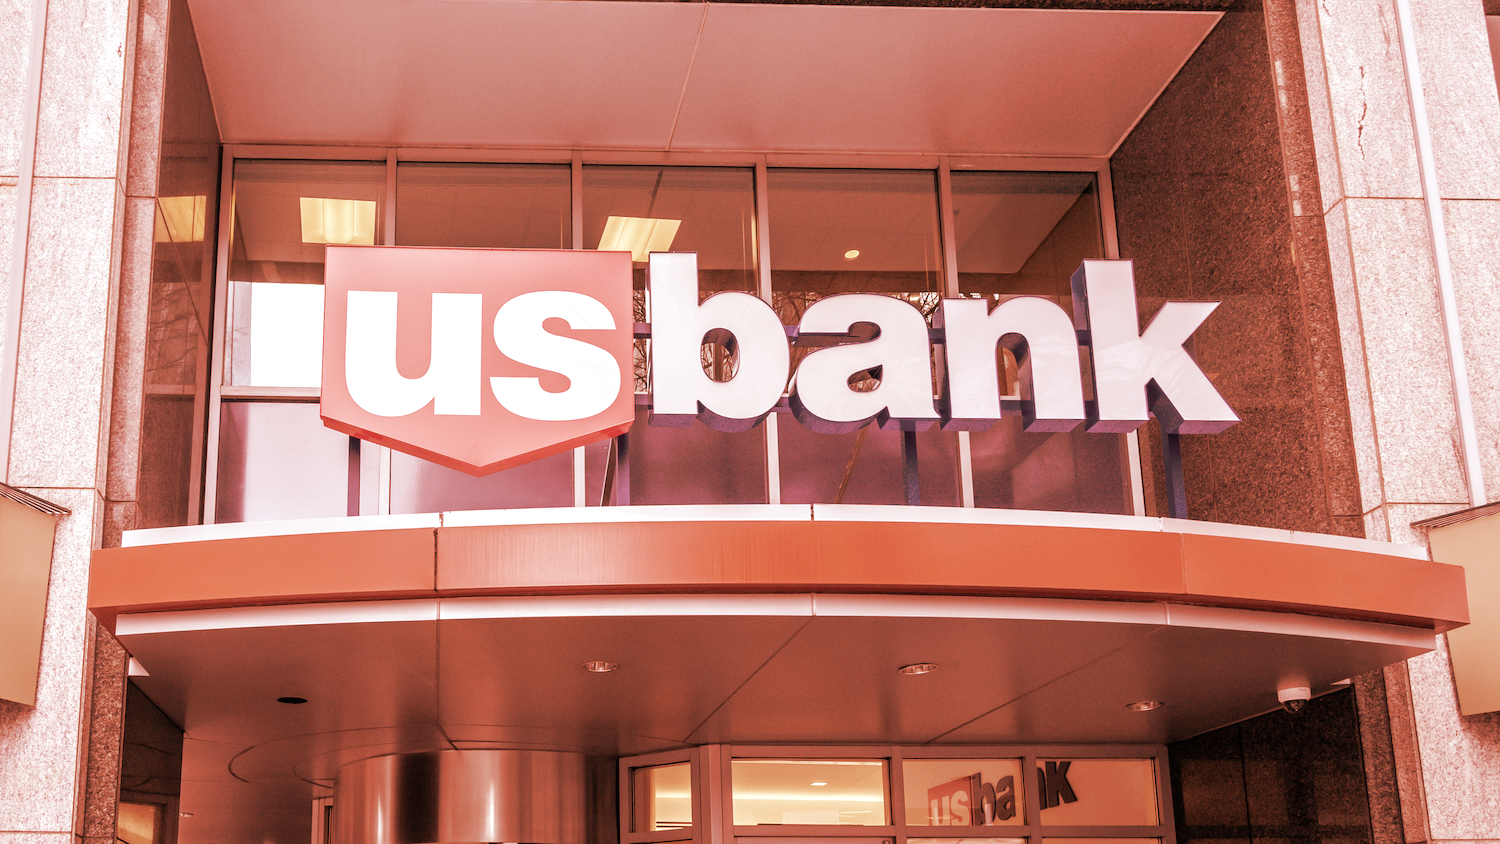 Fifth-Largest Bank in U.S. Now Offering Bitcoin Custody Services